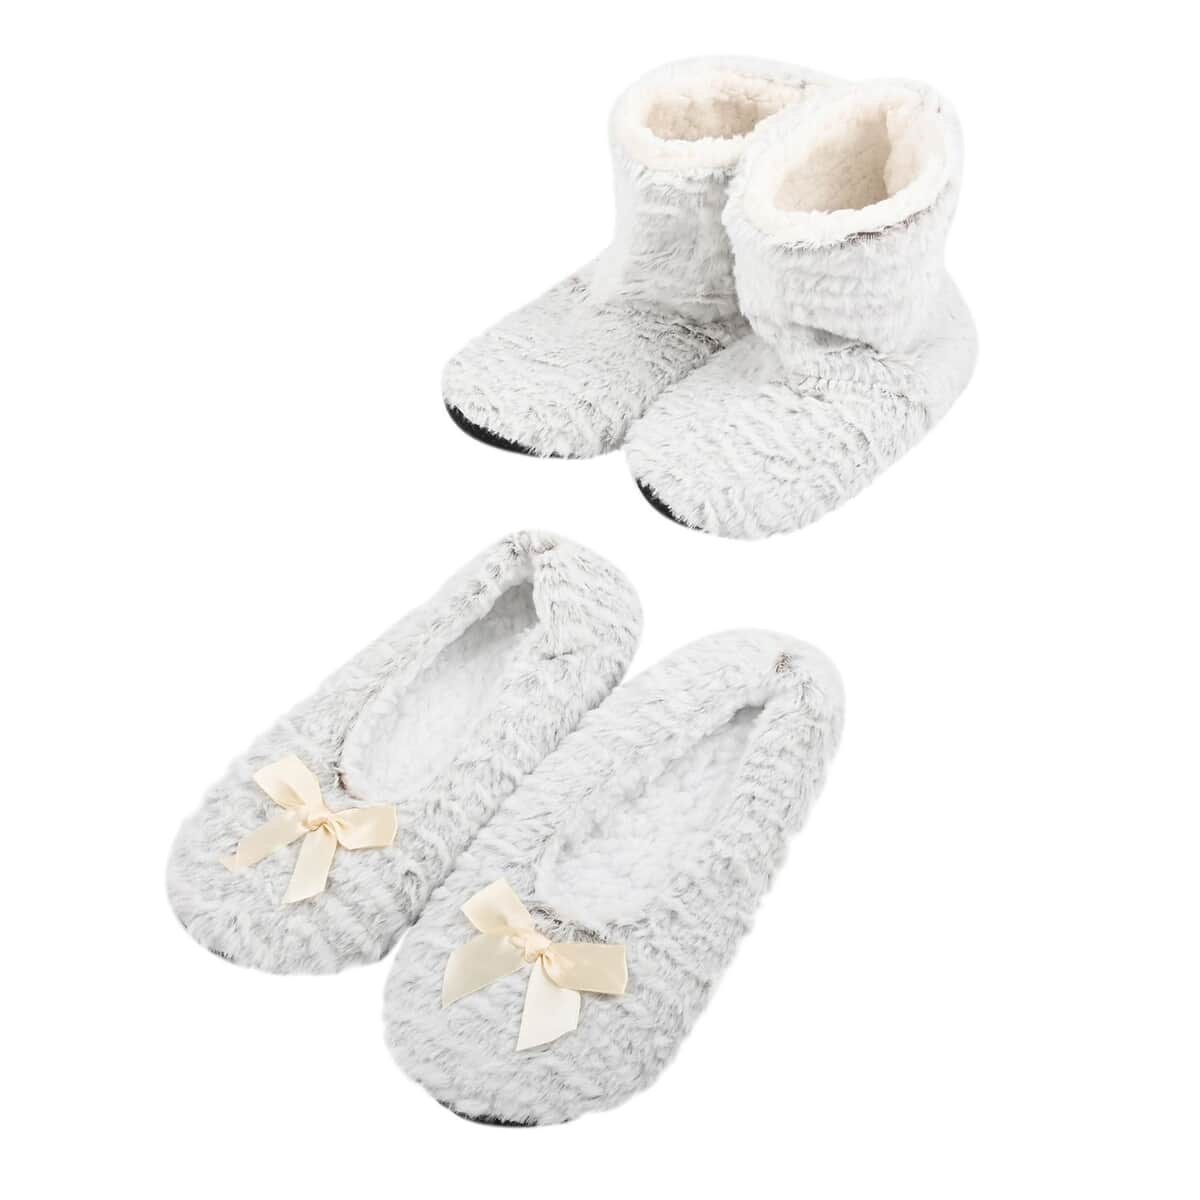 HOMESMART Light Gray Microfiber Faux Fur, Sherpa Booties and Matching Ballerina Slippers (Women's Size 5-10) image number 0